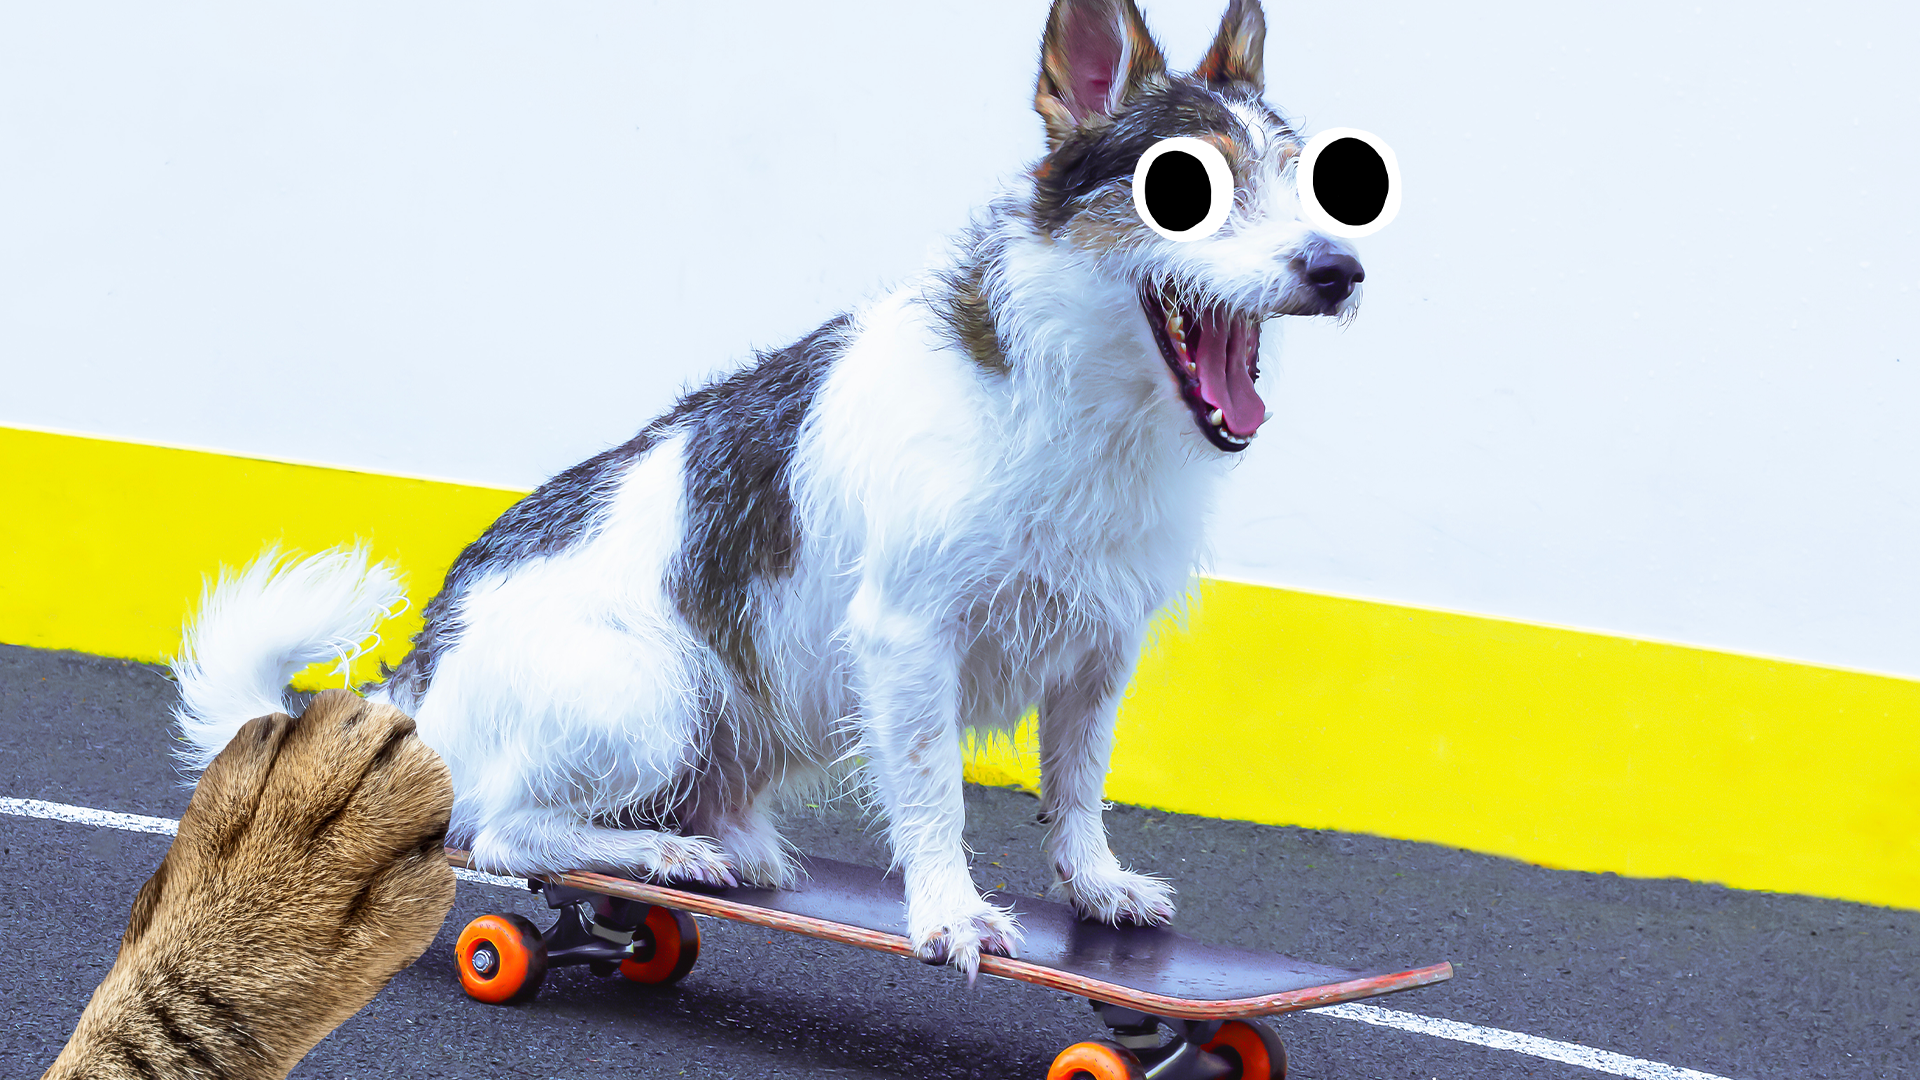 Dog on skateboard with paw in corner